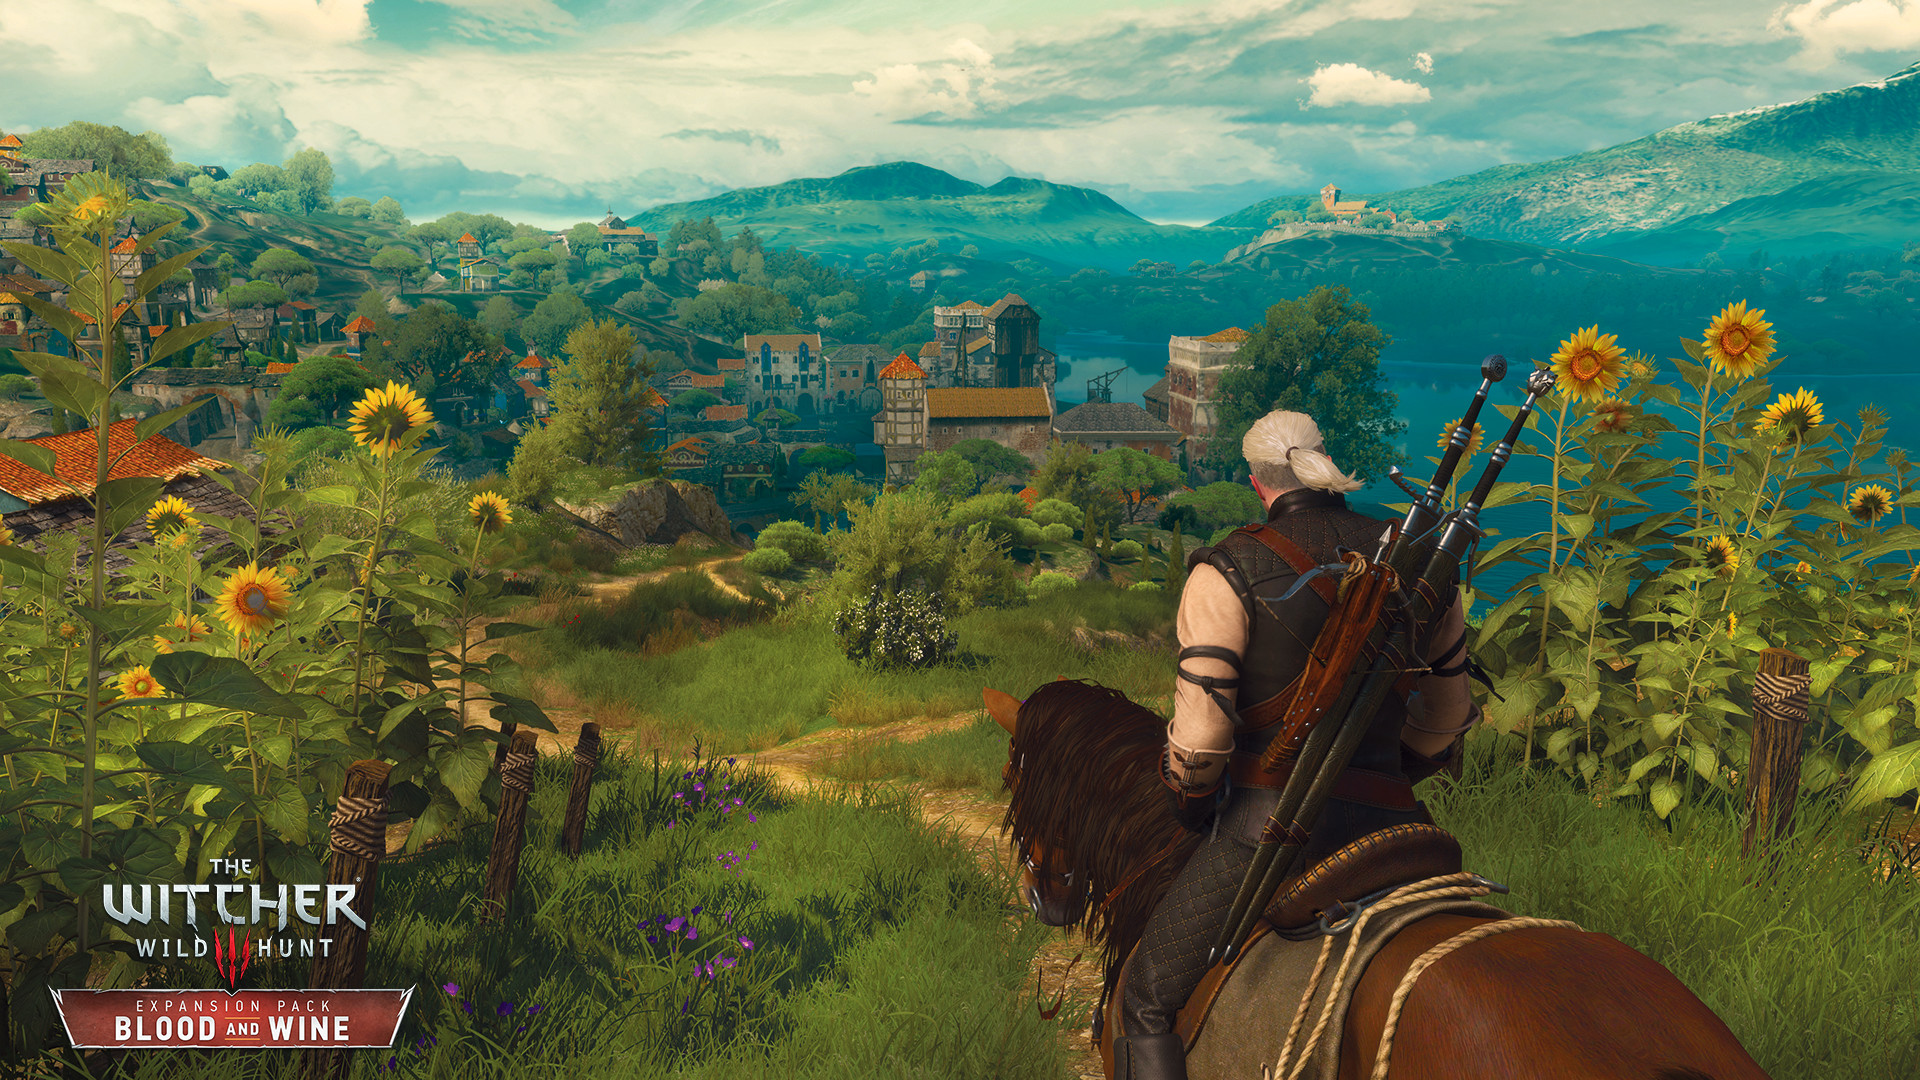 The Witcher 3: Wild Hunt - Blood and Wine screenshot